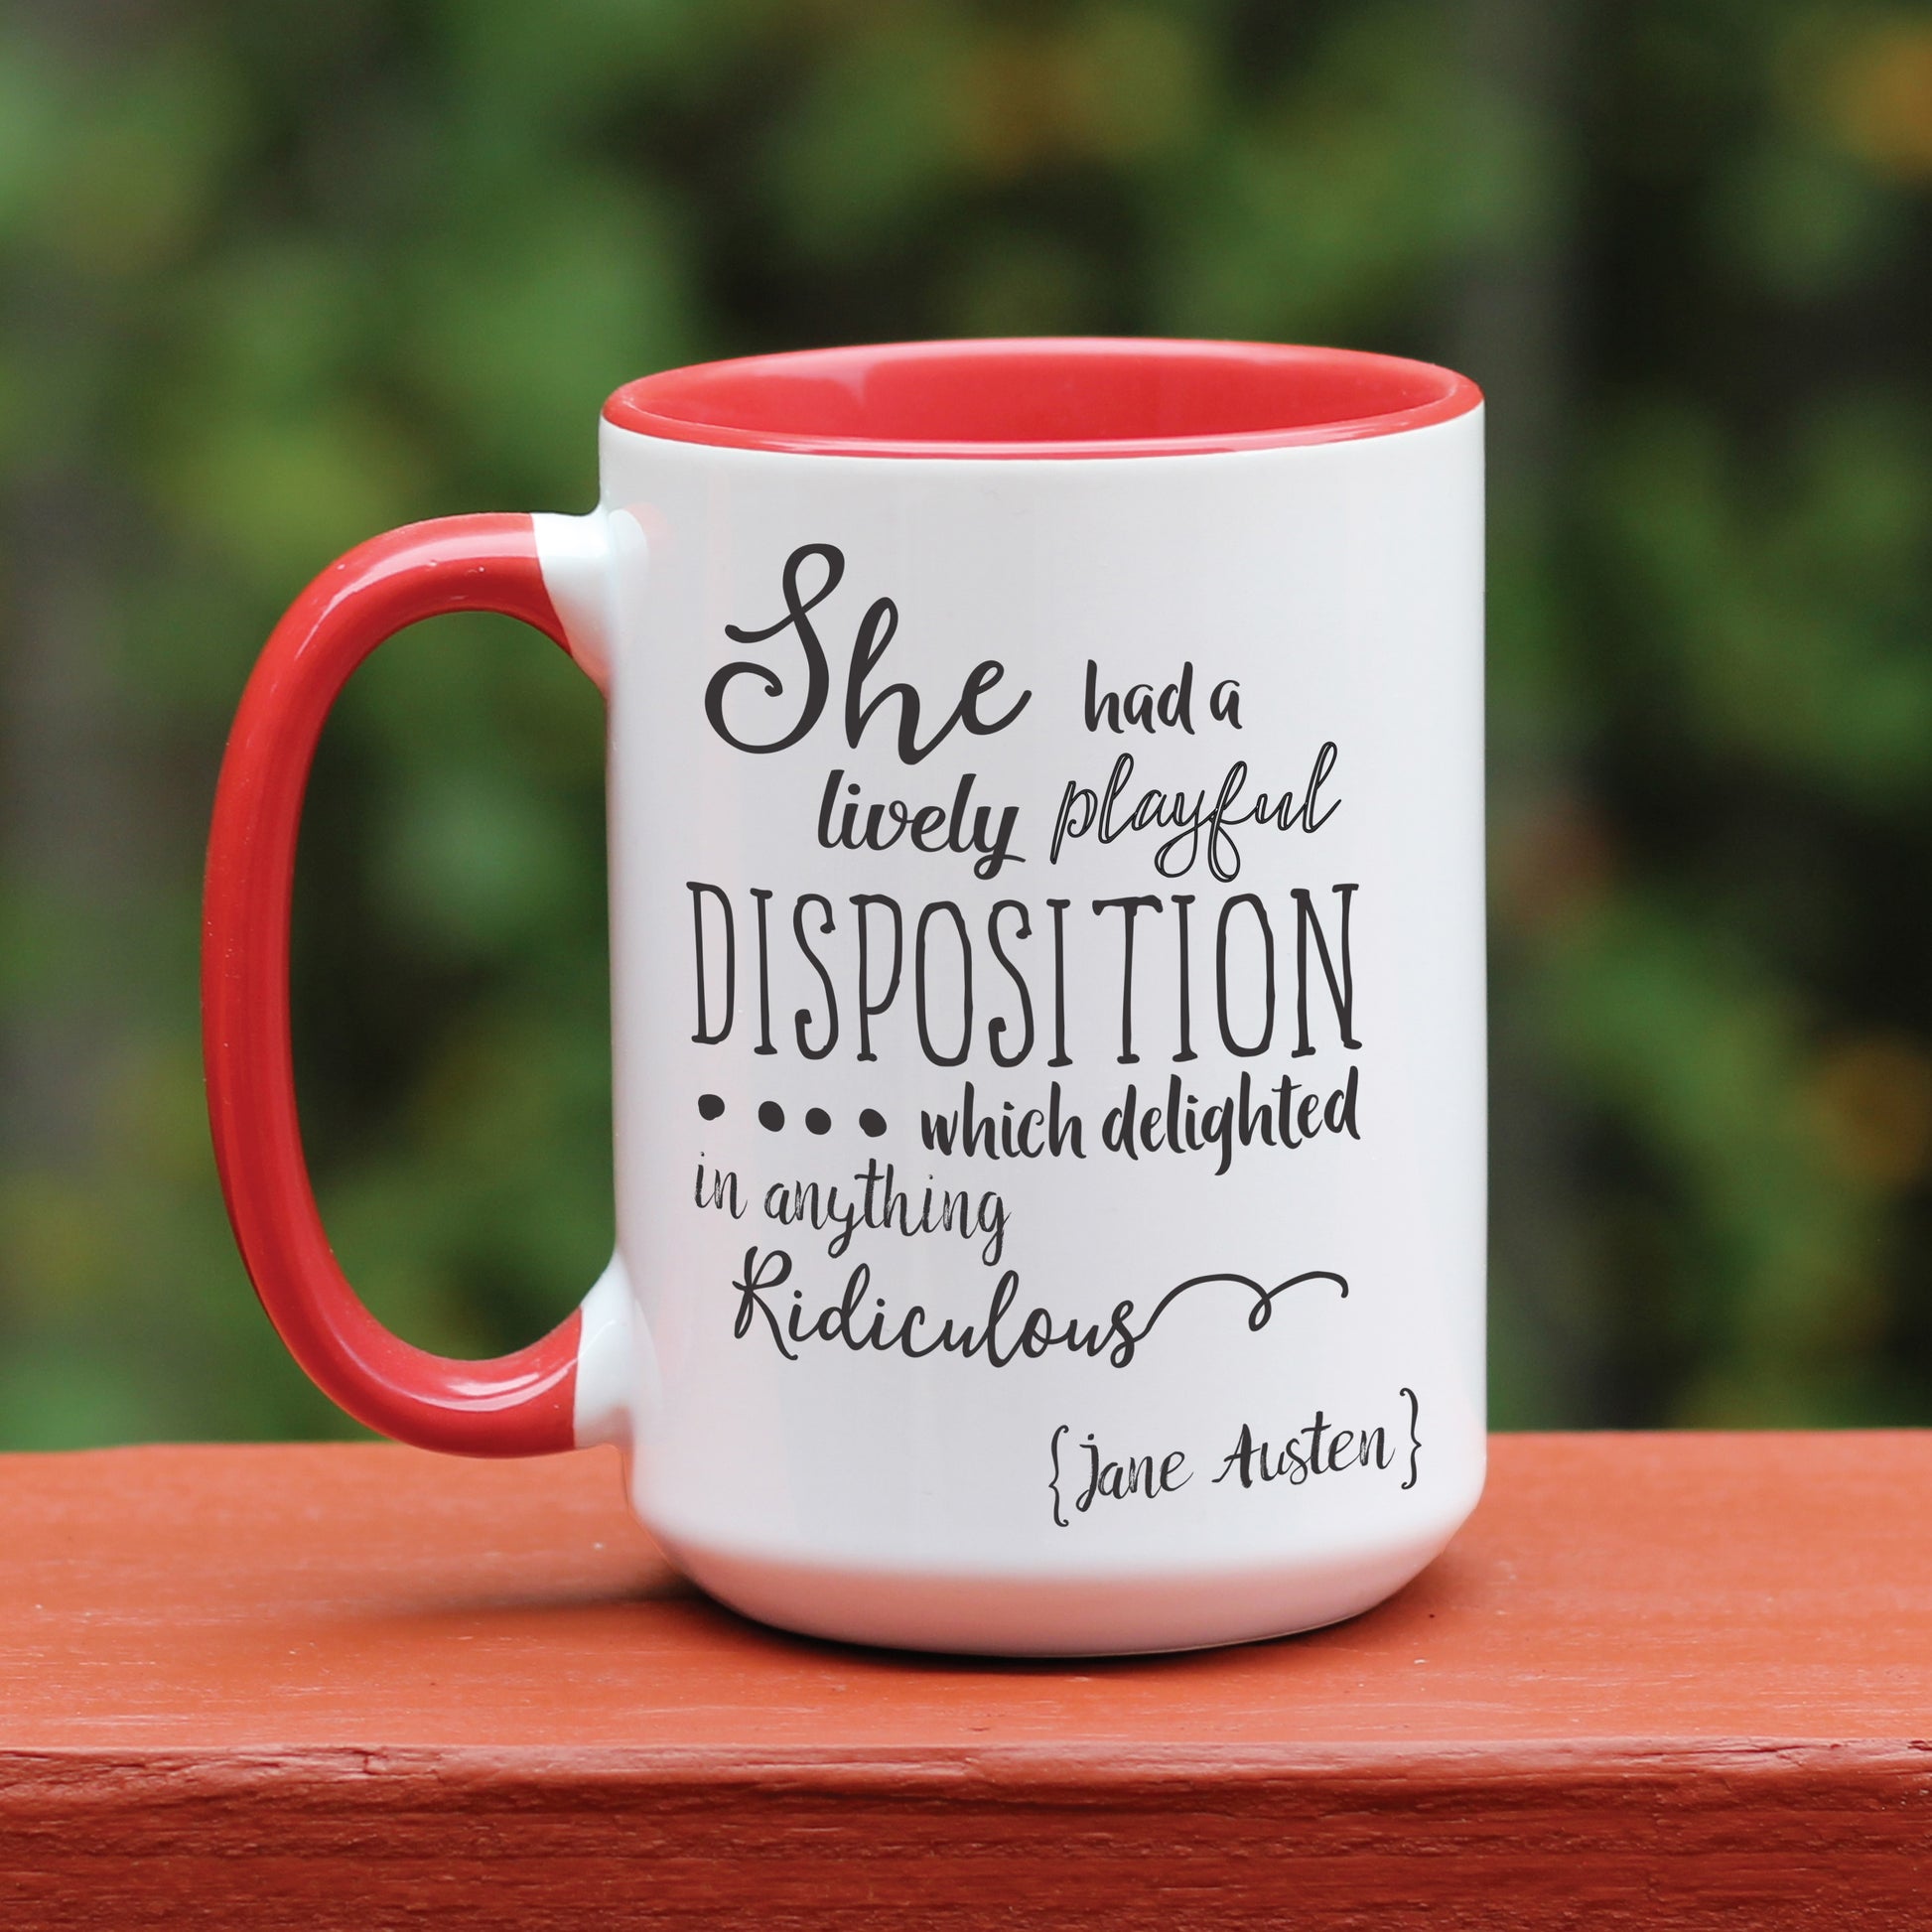 Jane Austen Pride and Prejudice quote white coffee mug with red handle.